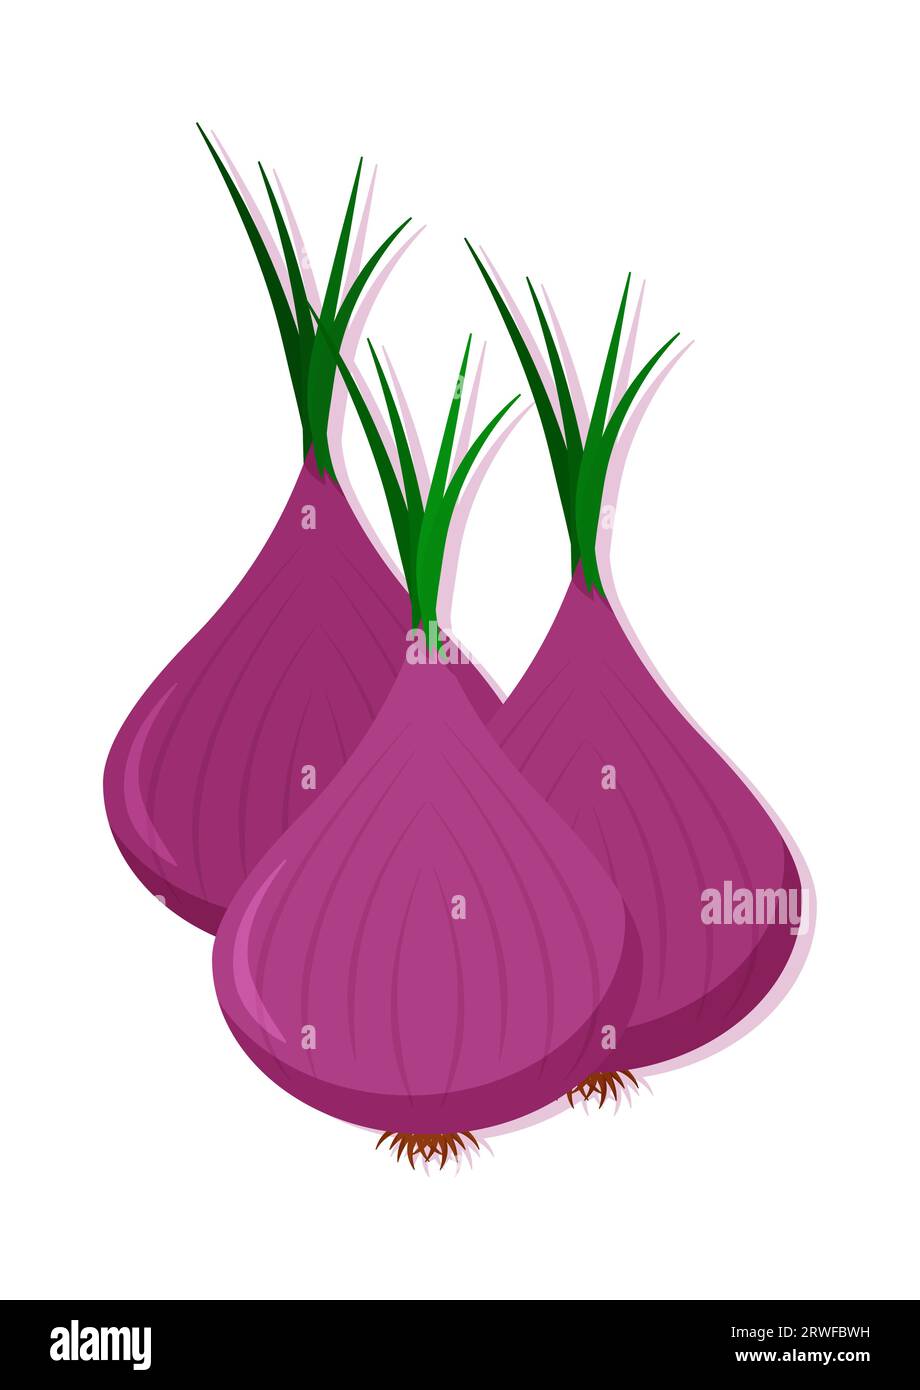 Vector illustration of red onion fresh vegetable. Delicious healthy food Stock Vector